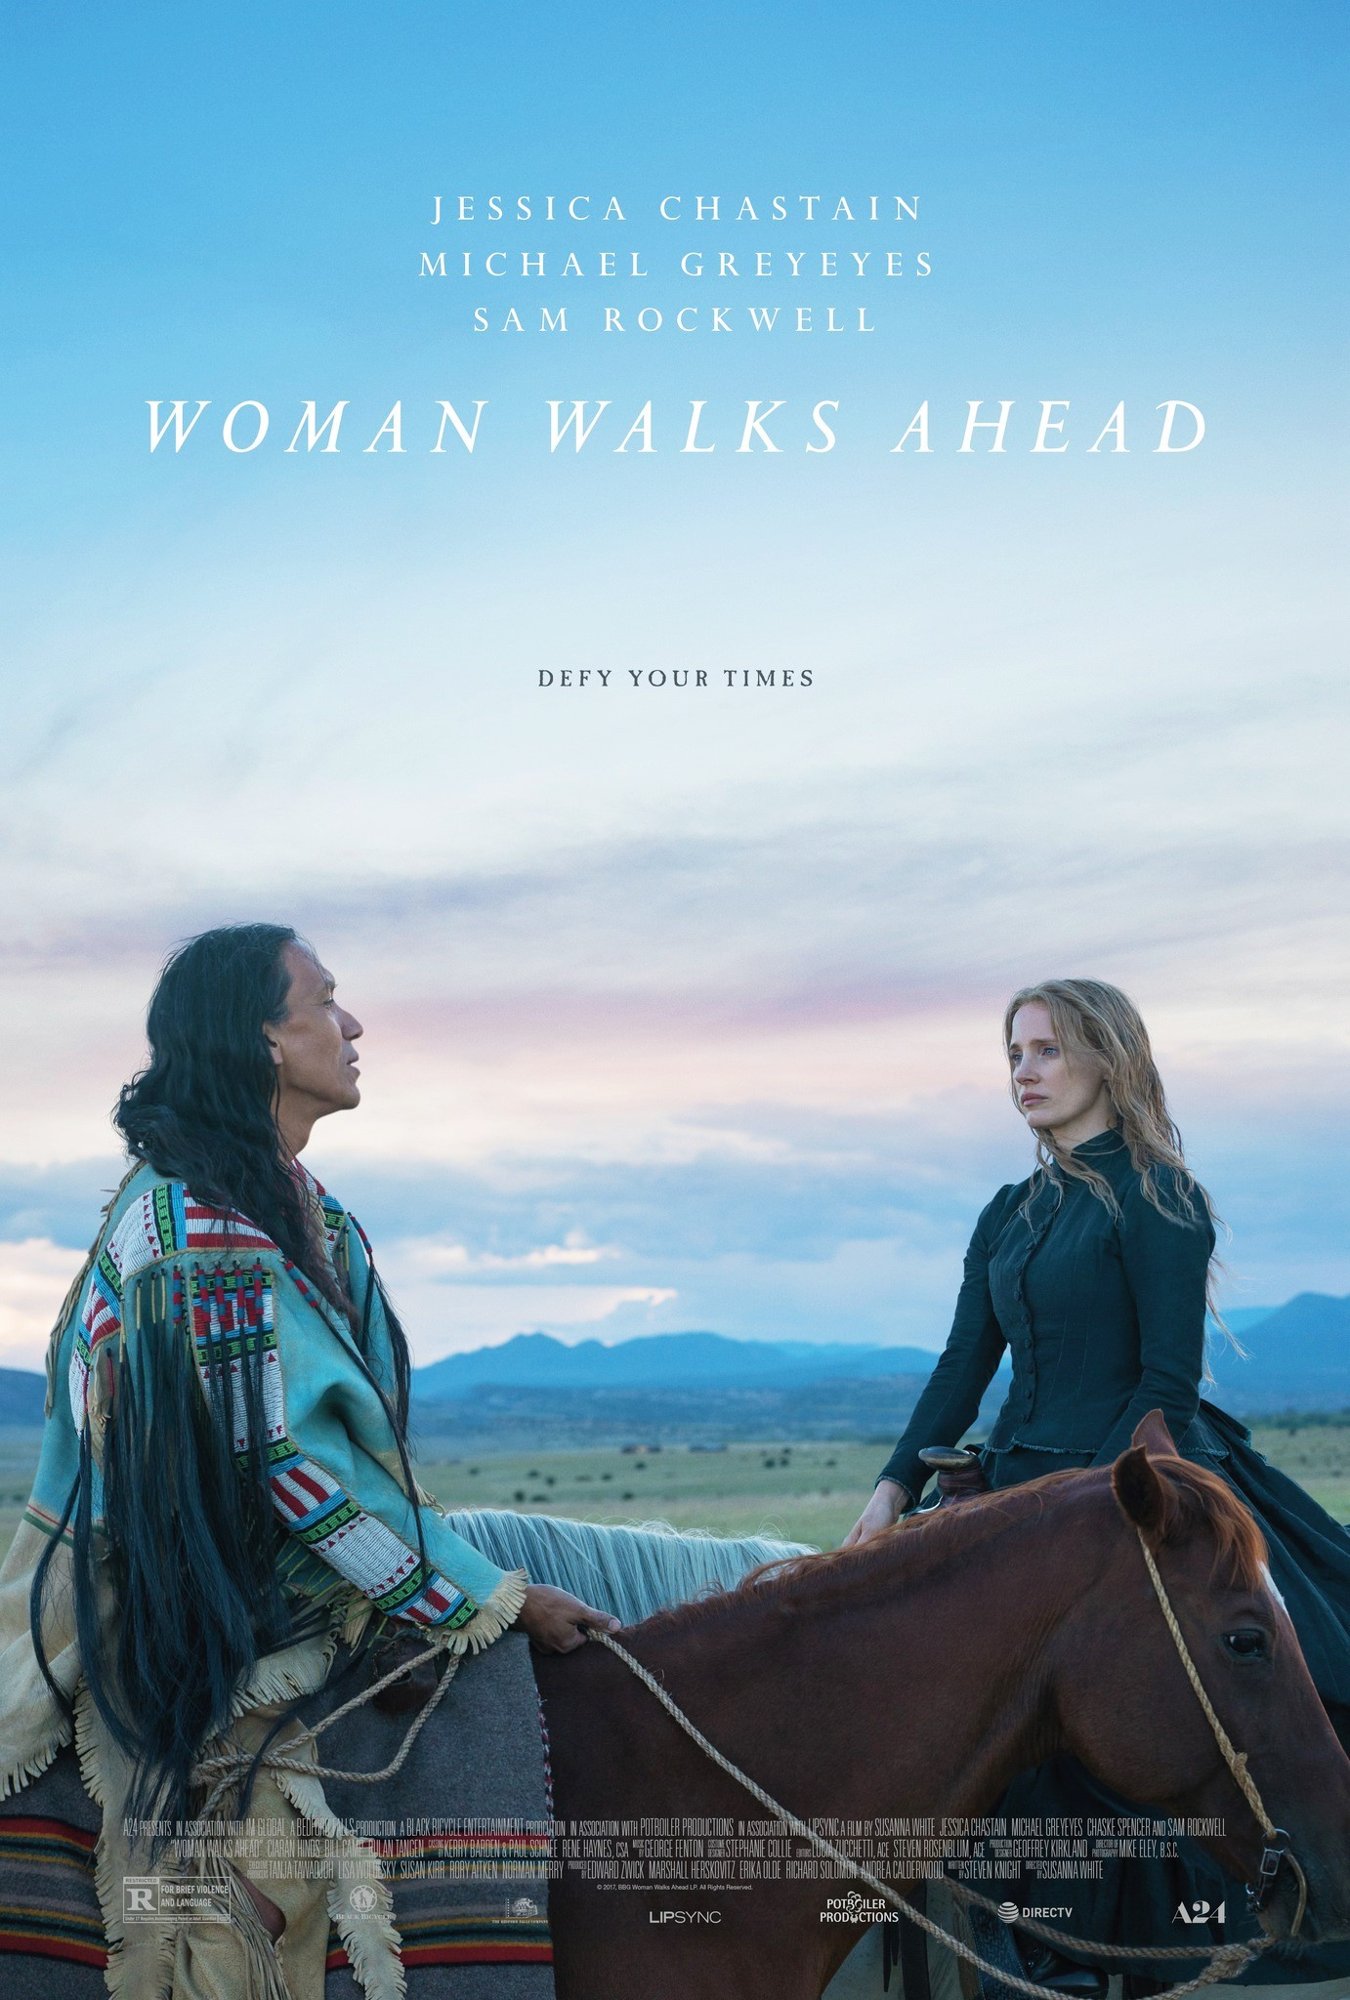 Poster of A24's Woman Walks Ahead (2018)